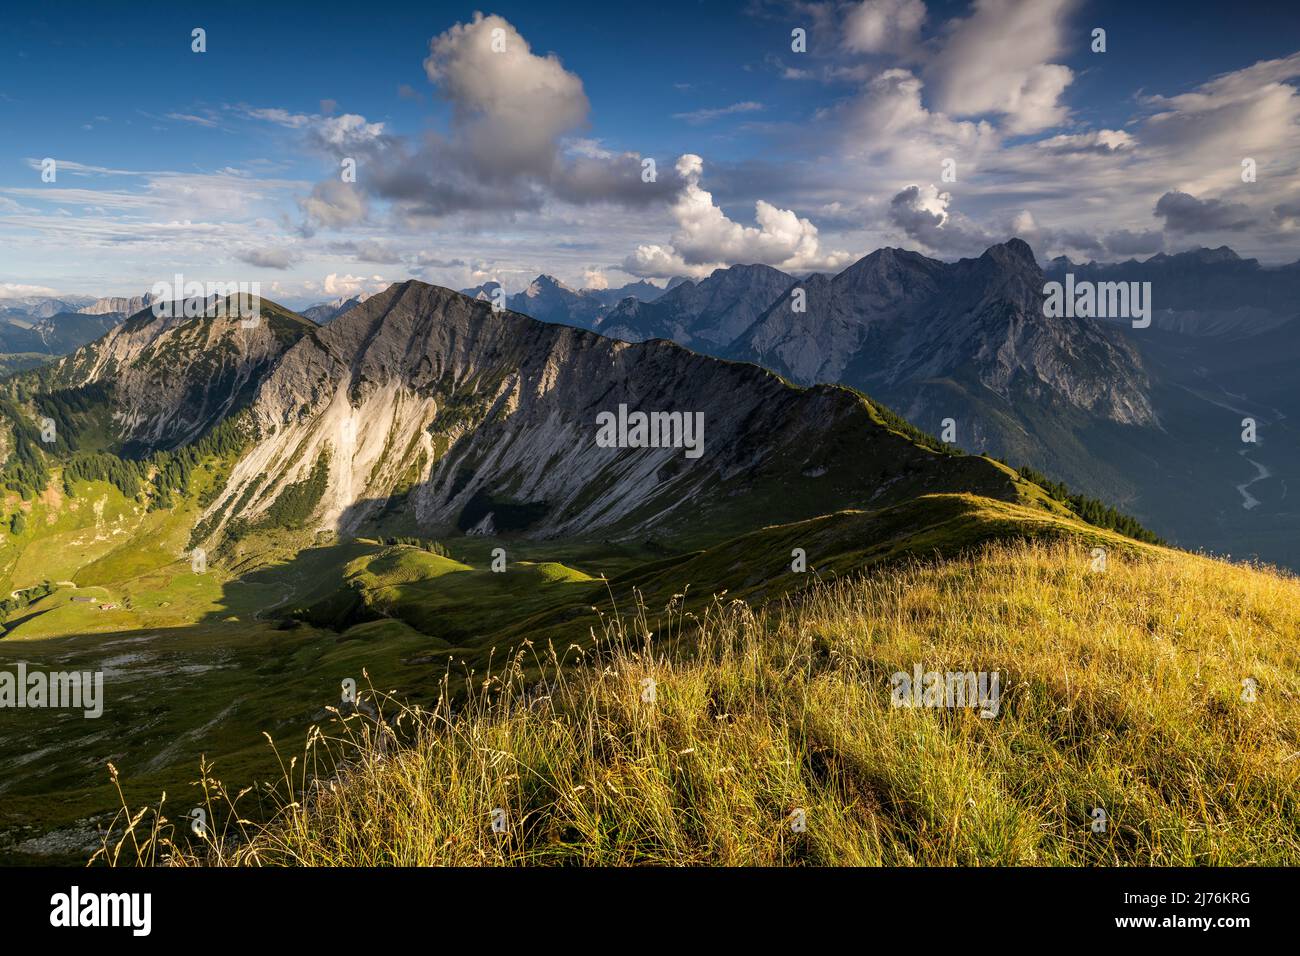 Late summer day with view from Schönalmspitze to Fleischbank, in the foreground golden grass and a mountain meadow, while the ridge leads to the next peak and light clouds shade parts of the picture. Stock Photo